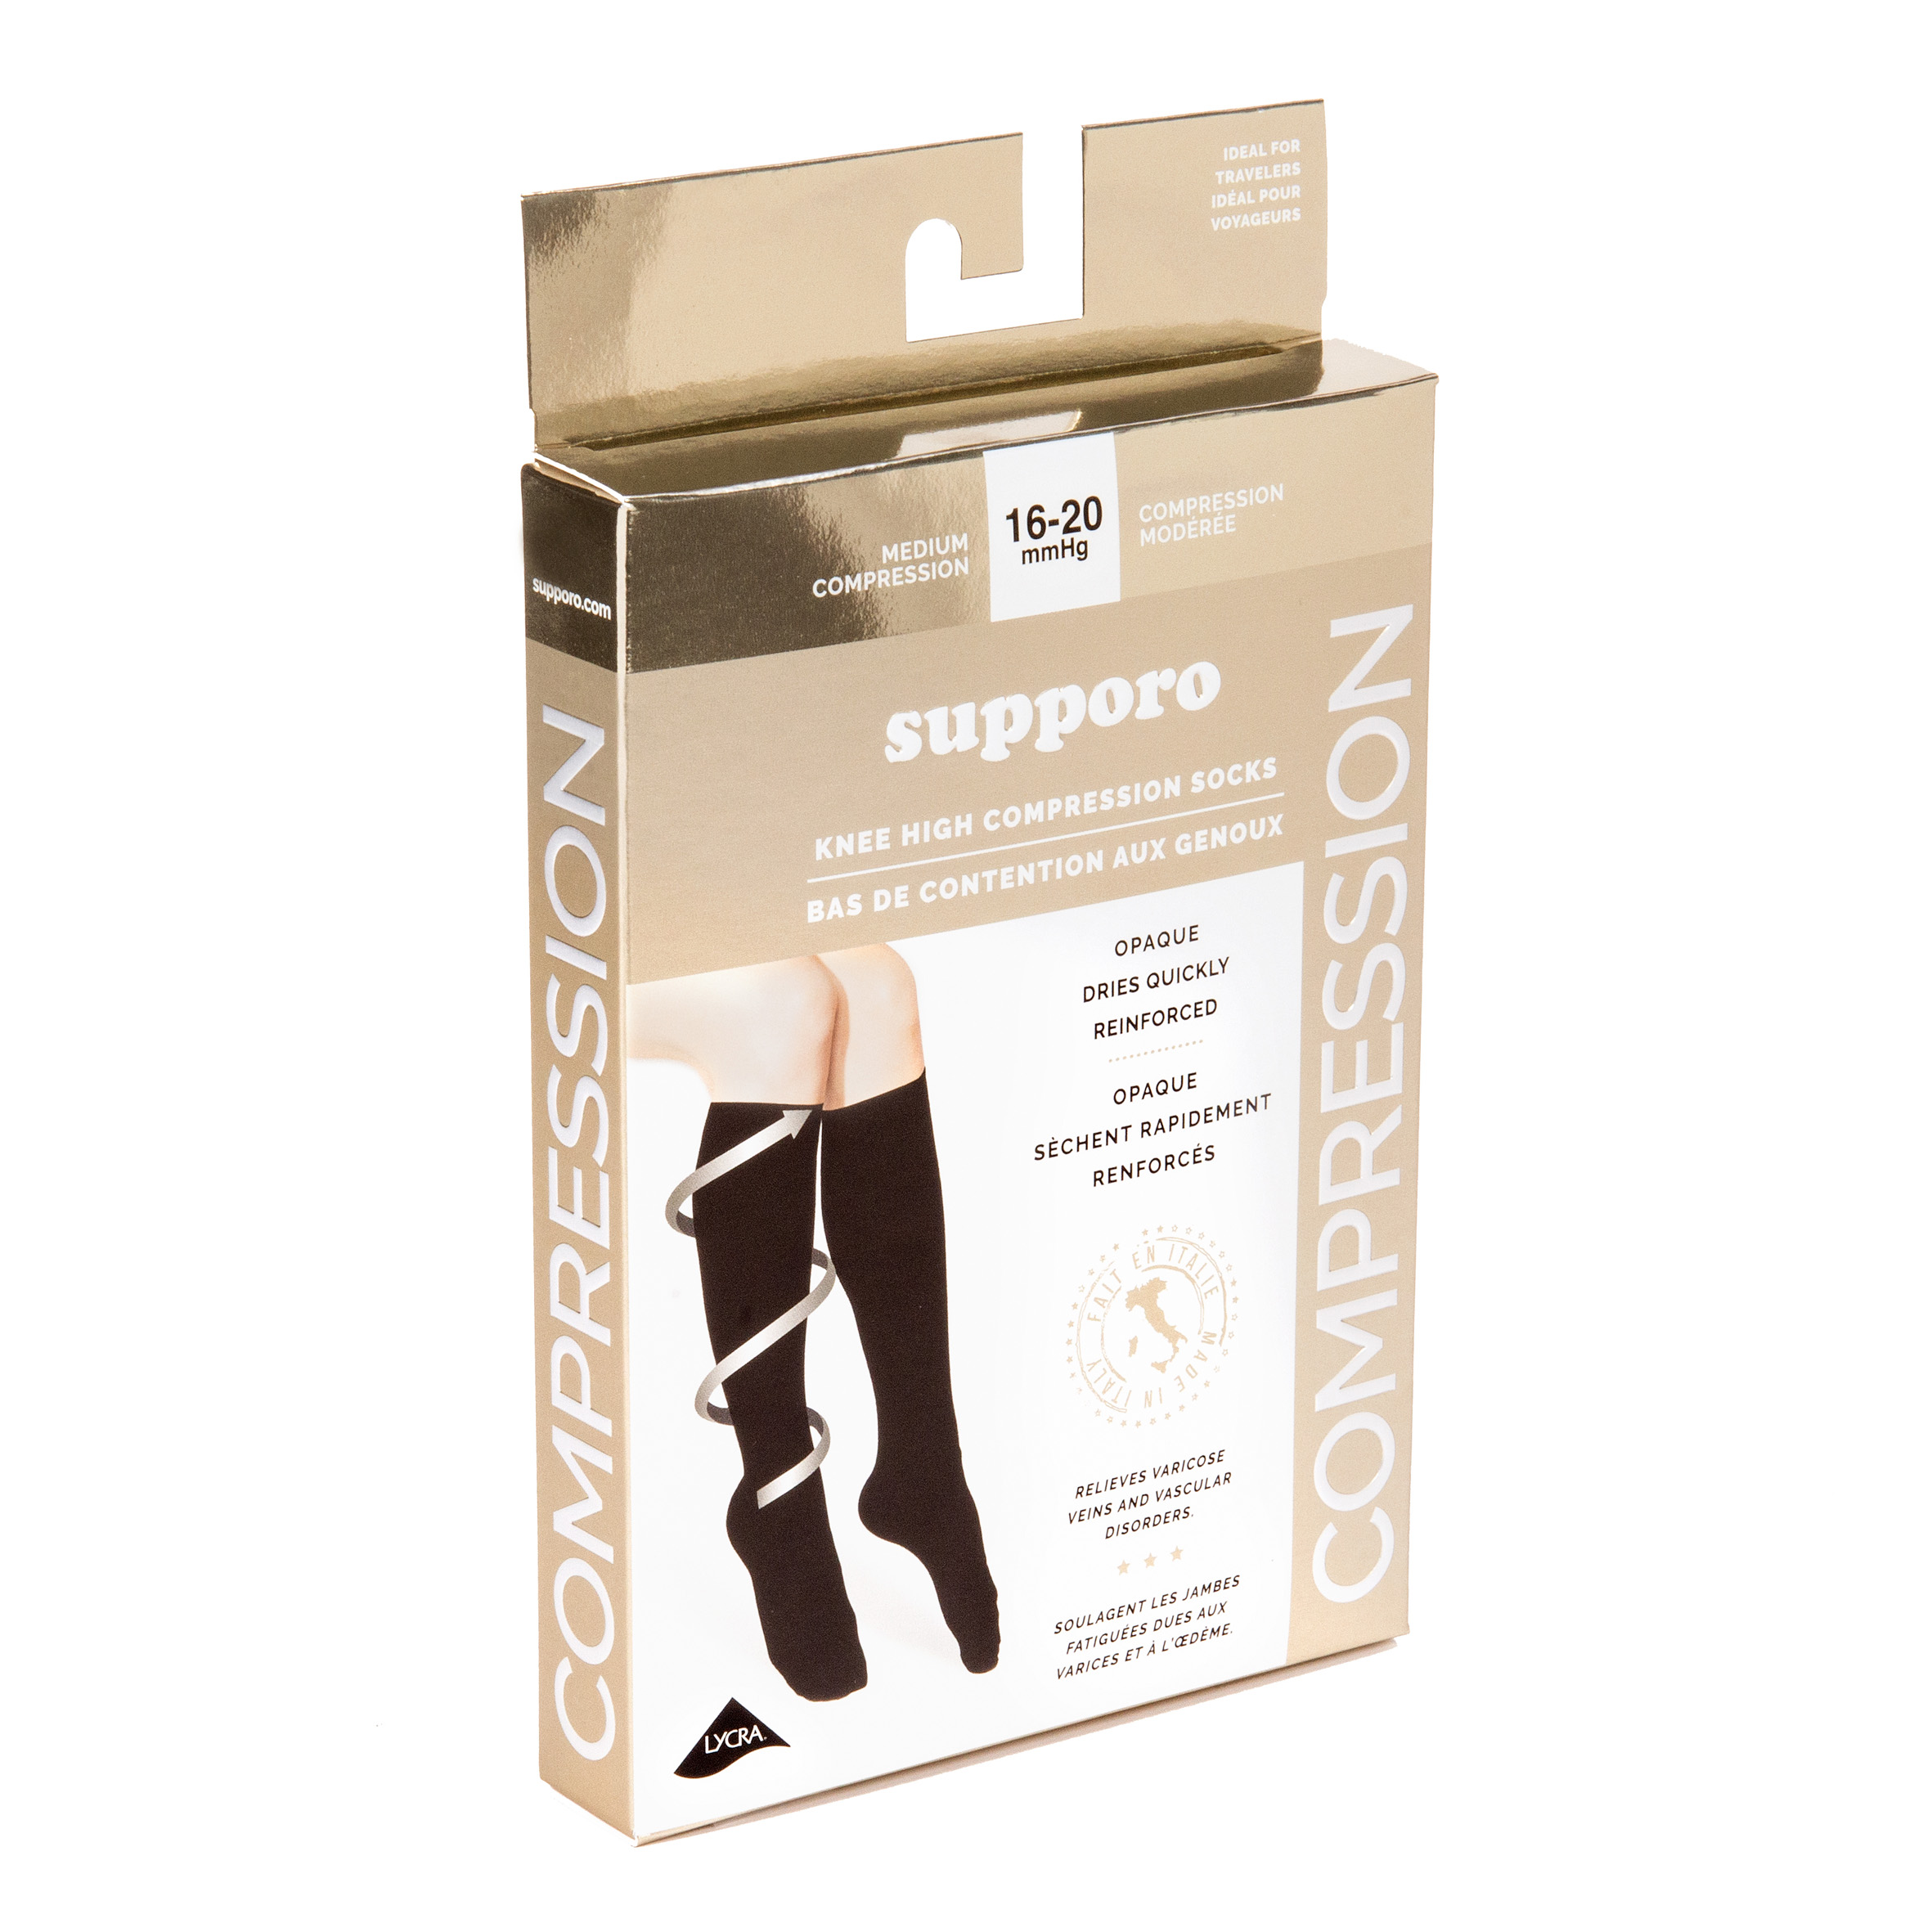 Supporo Opaque Knee-high Compression Socks, 16-20 mmHg - Supporo